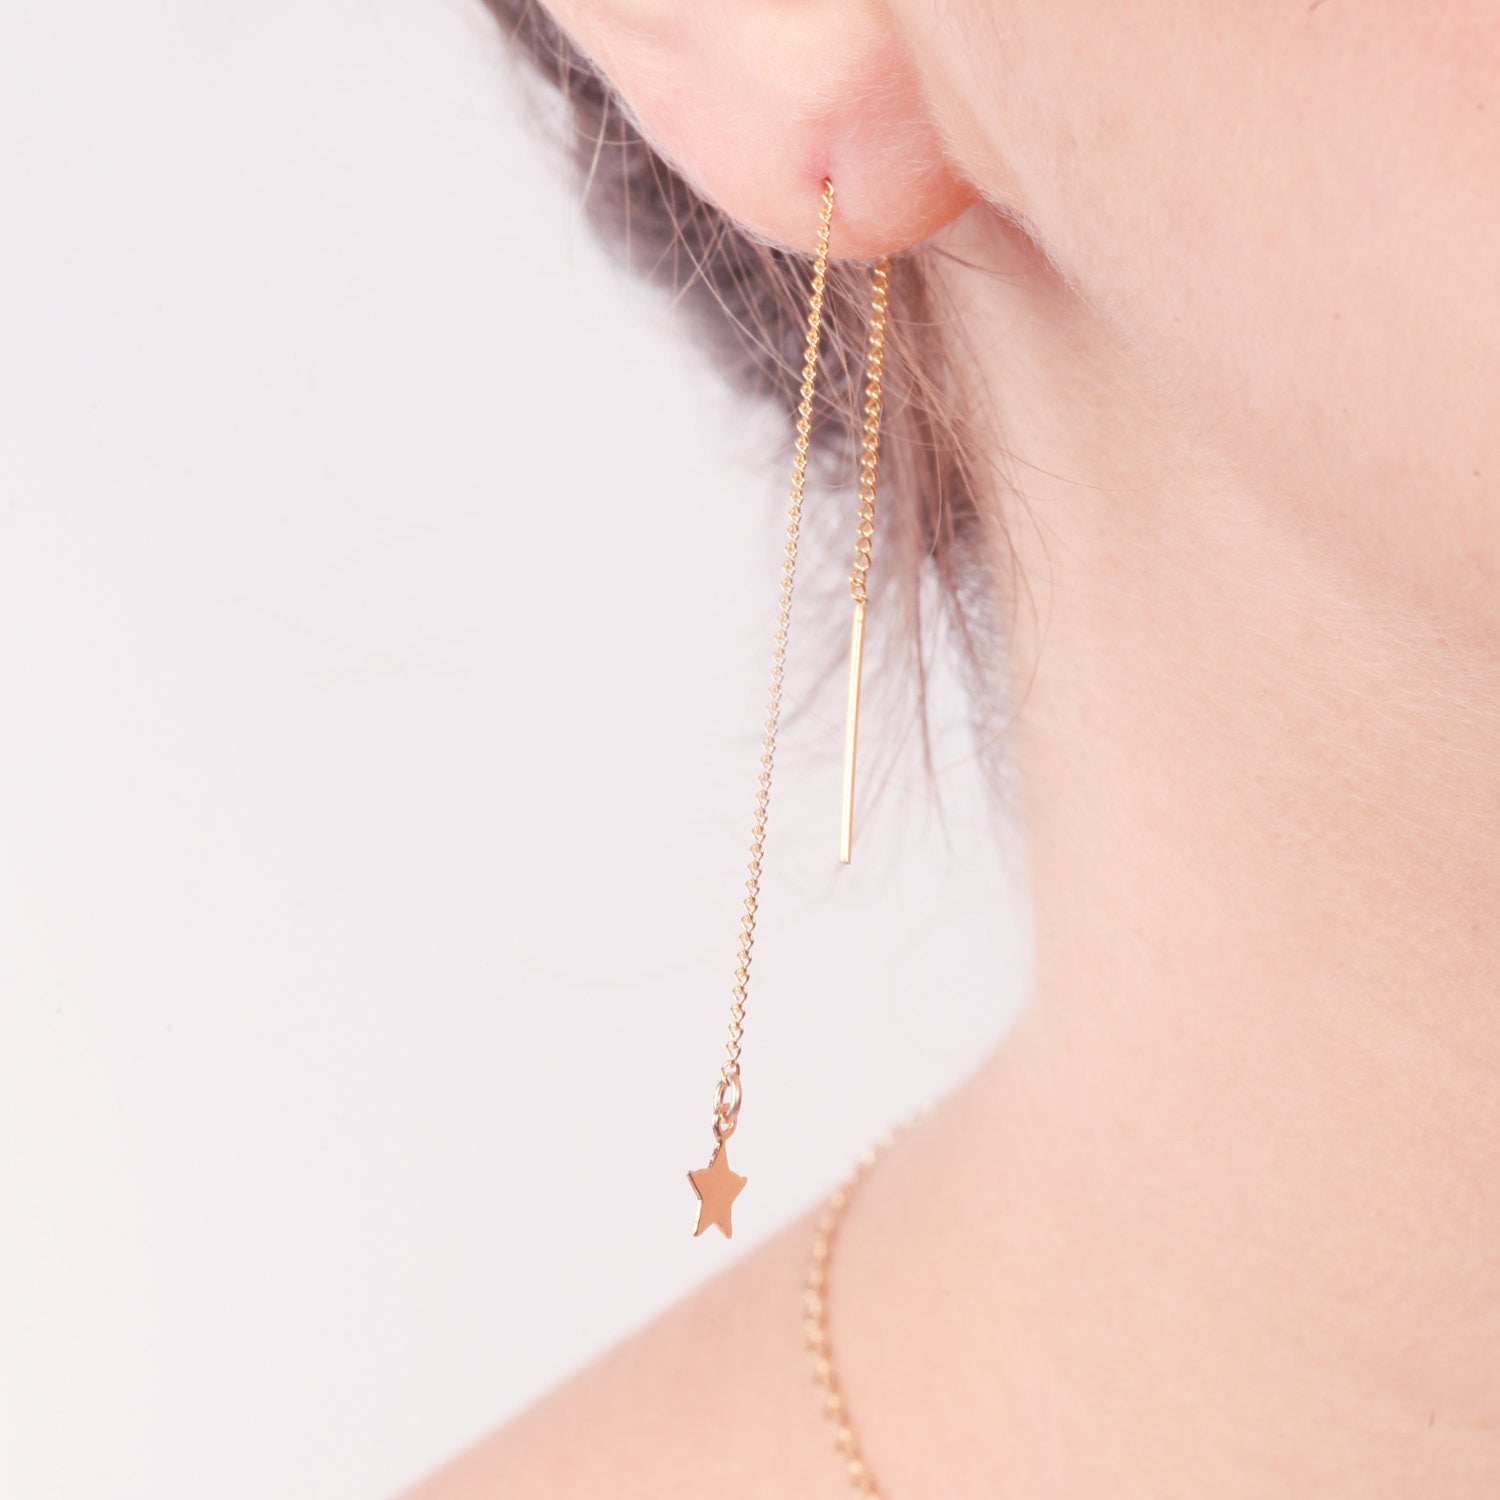 Gold filled hanging chain earrings